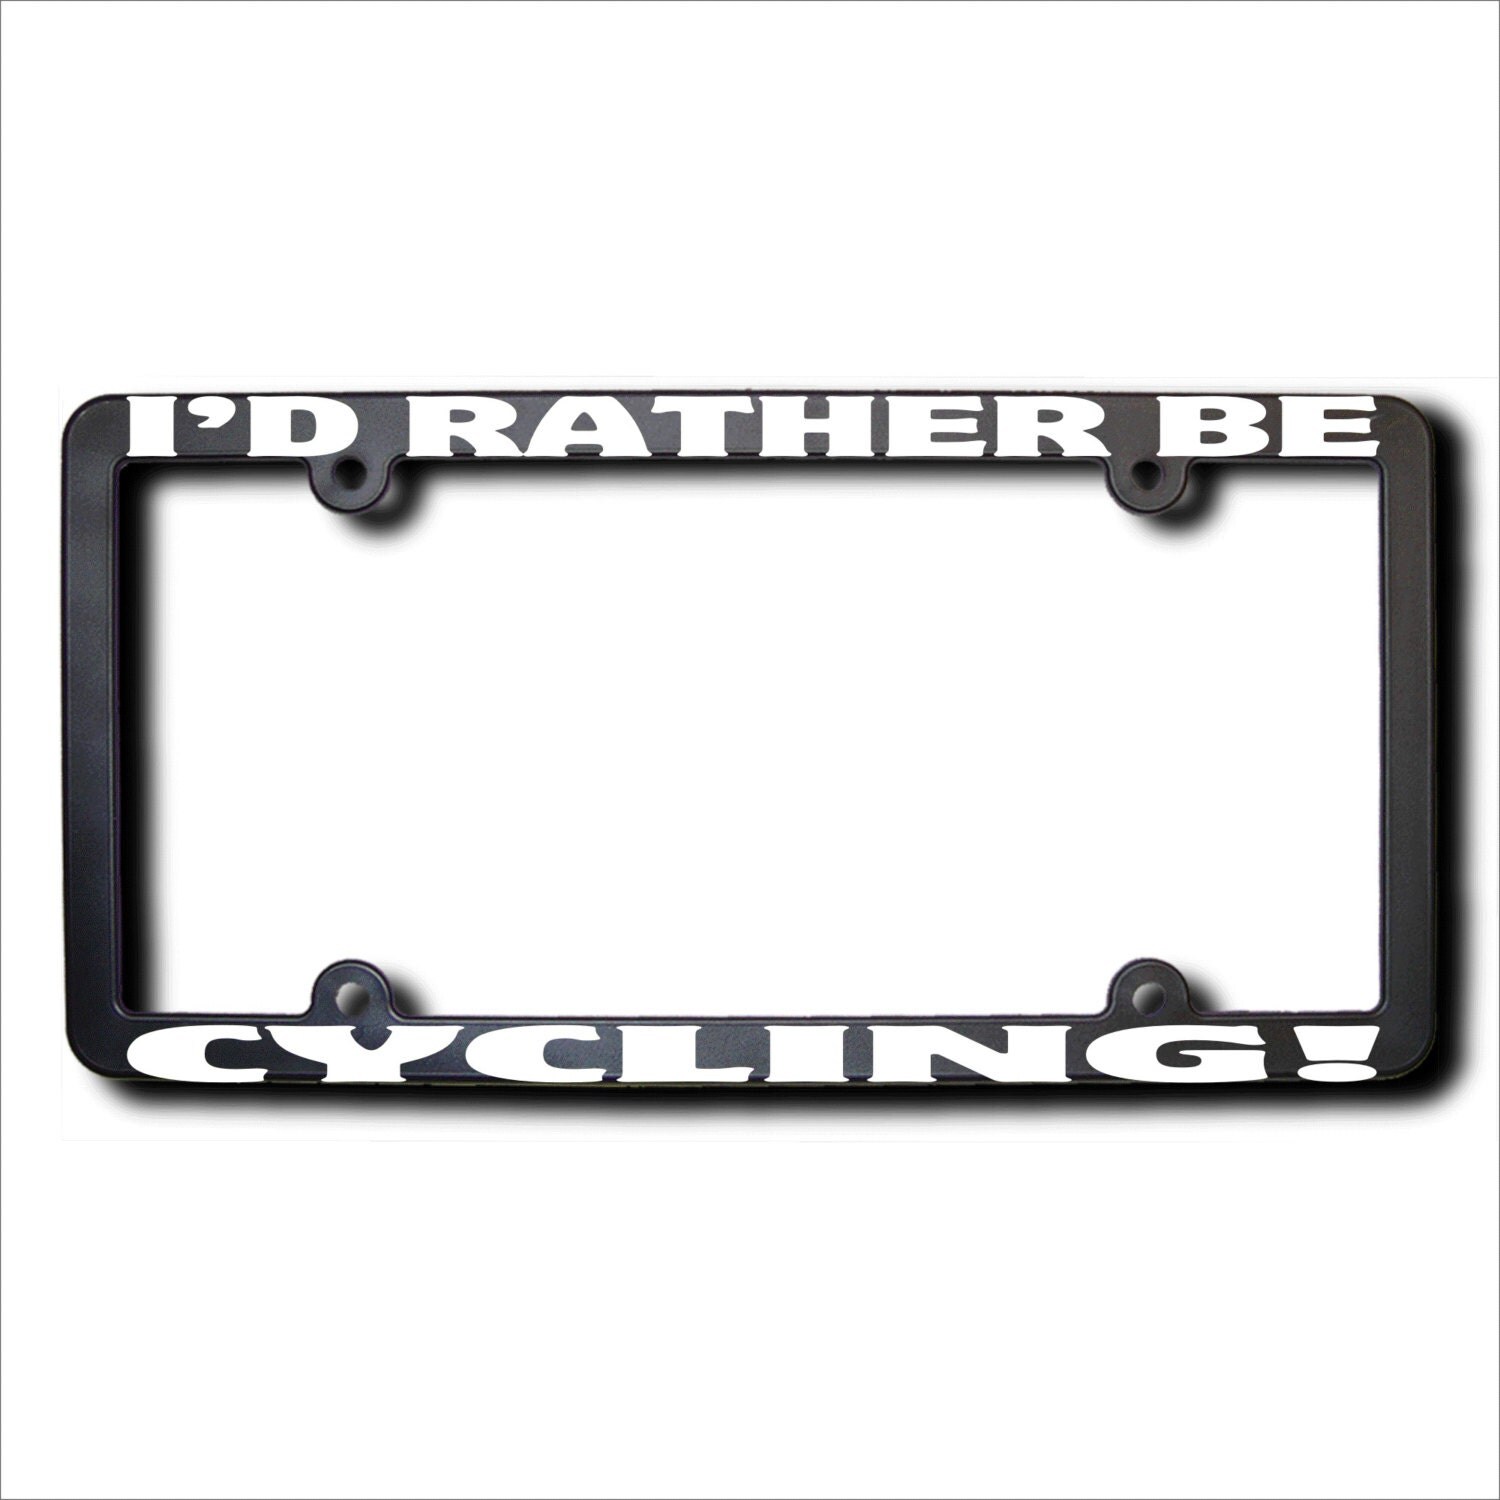 Id Rather Be Cycling License Plate Frame T Usa with cycling license plate frame intended for Motivate